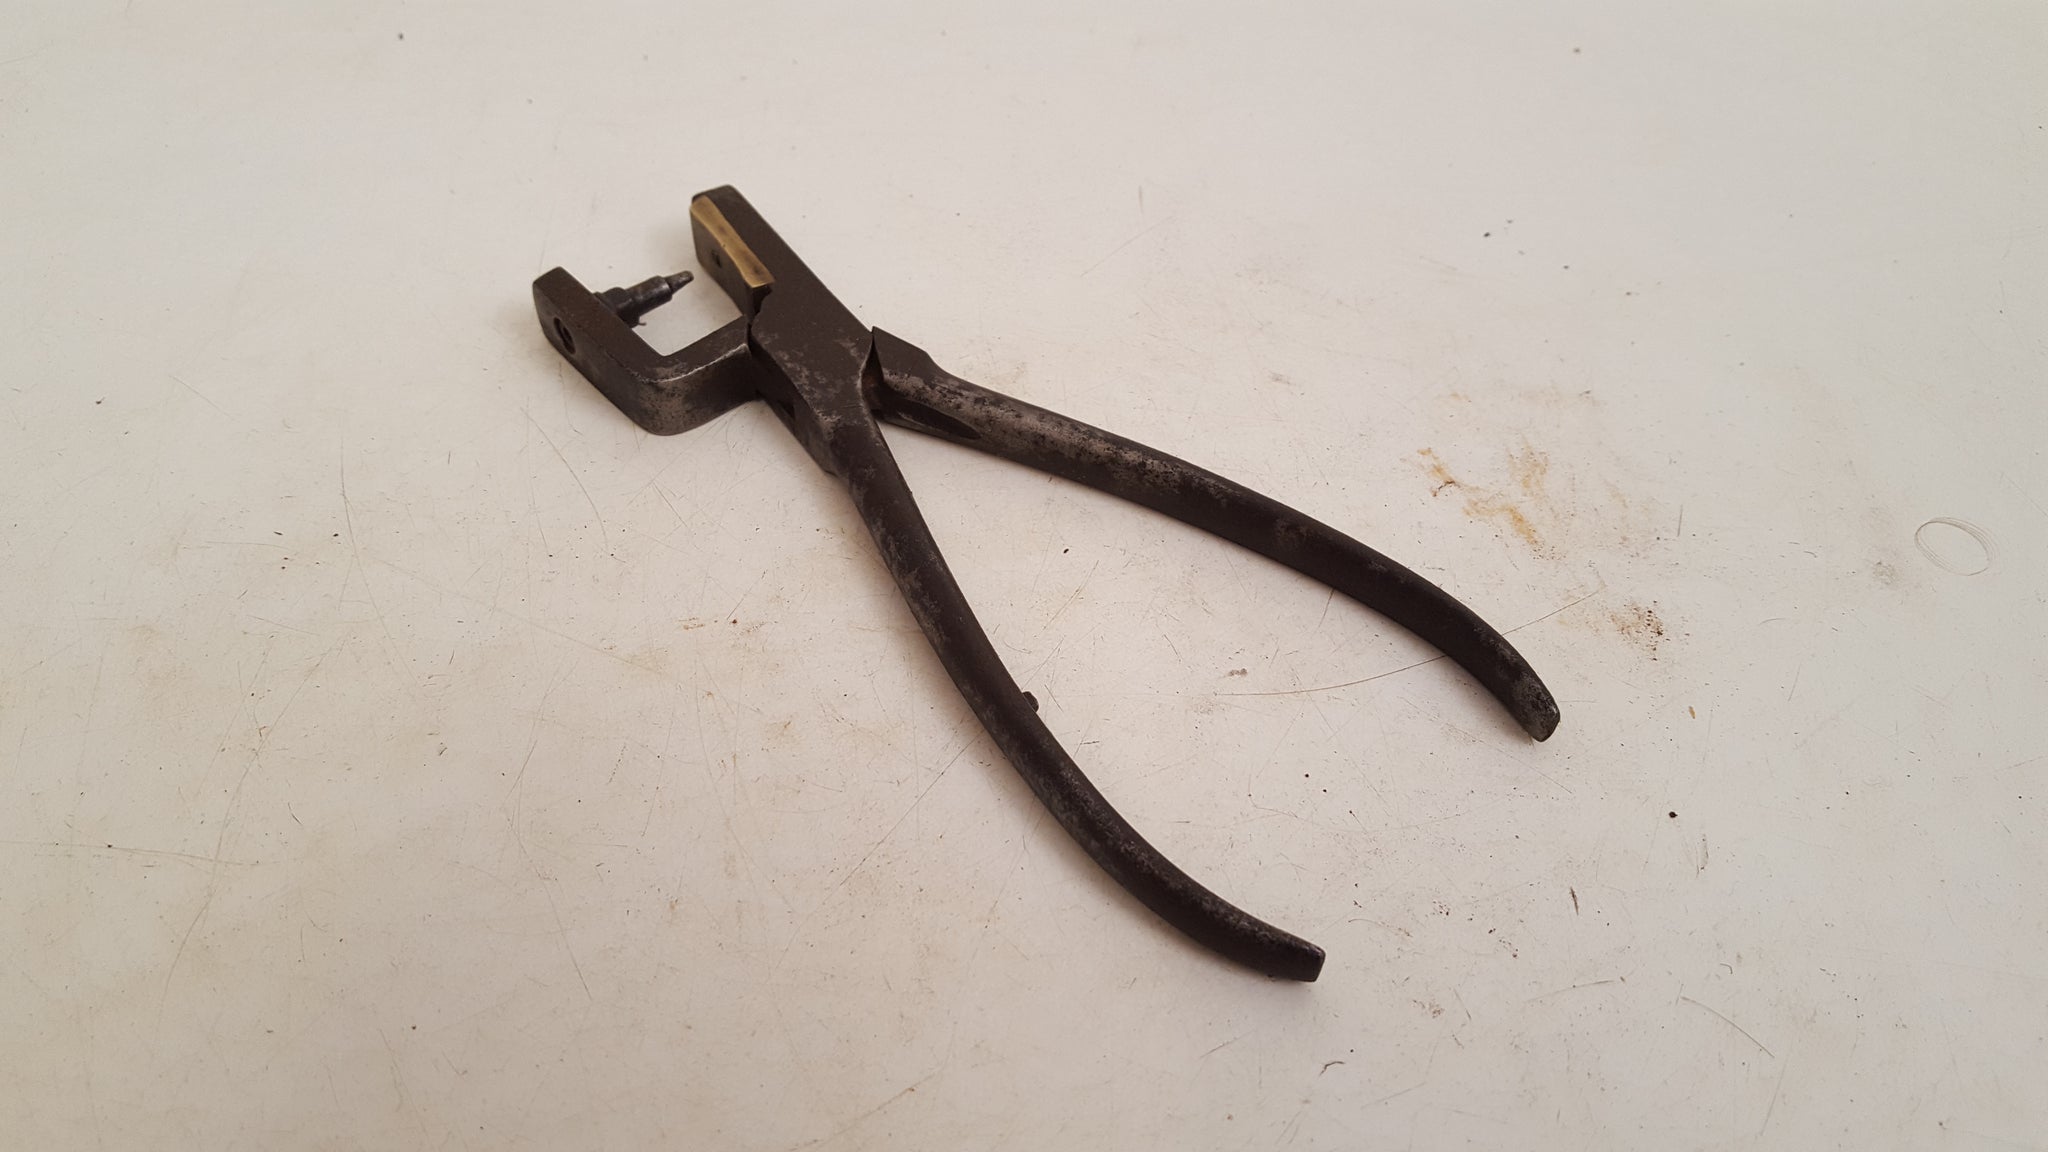 7 1/2" Vintage Leather Workers Hole Punch 42332